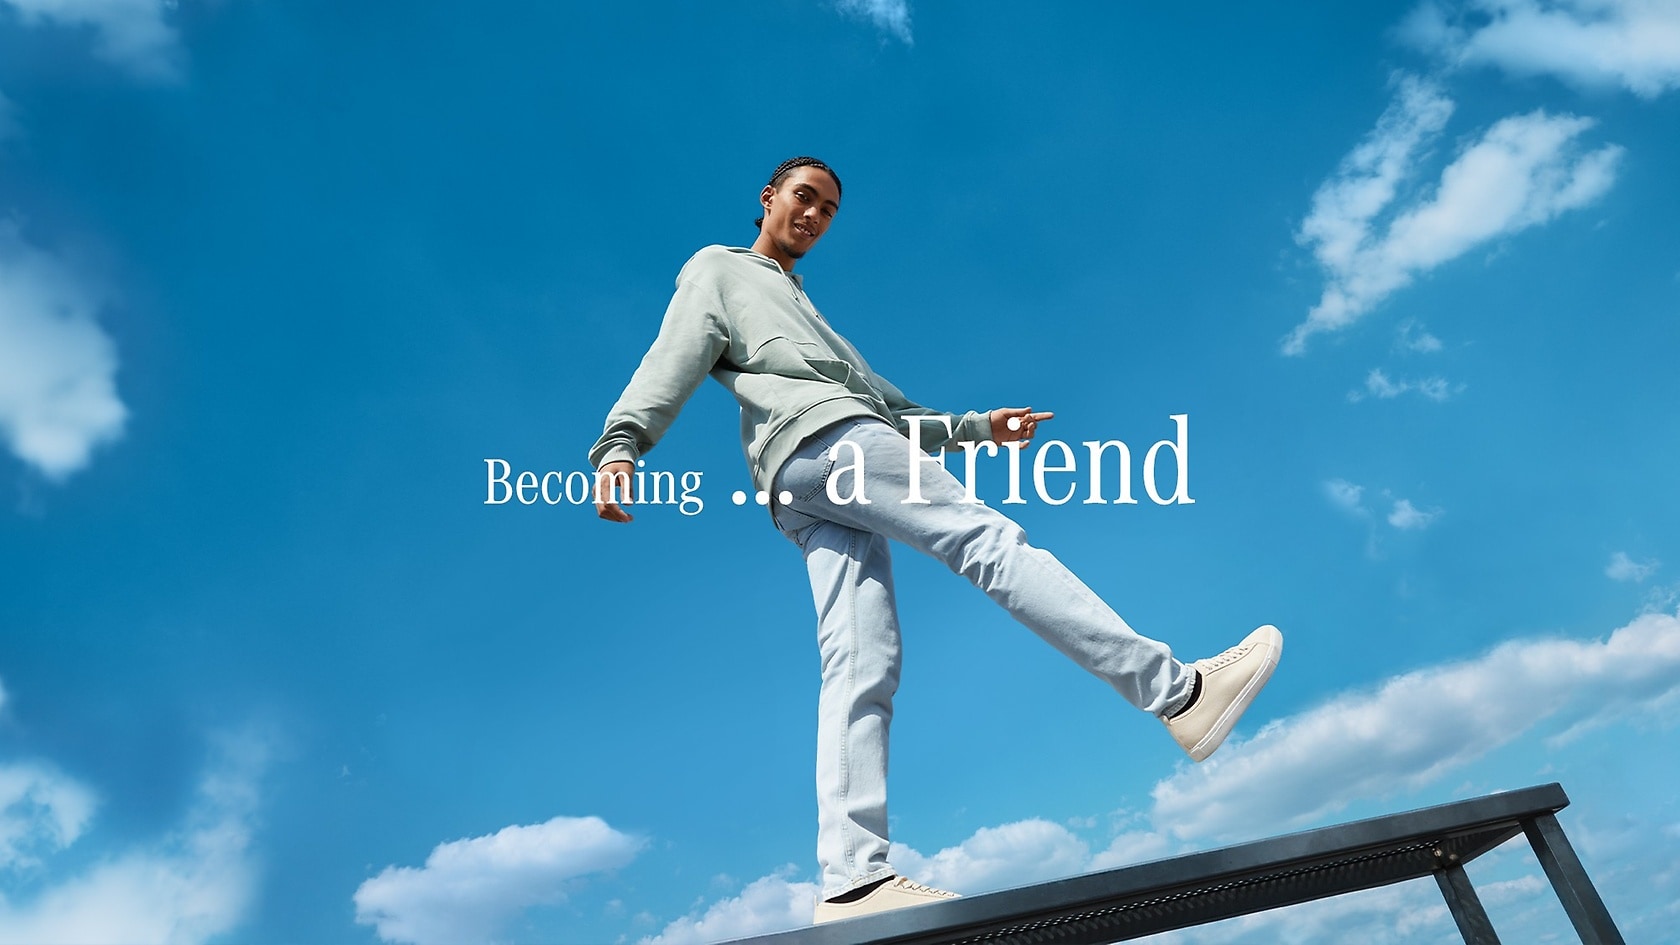 Becoming... a Friend